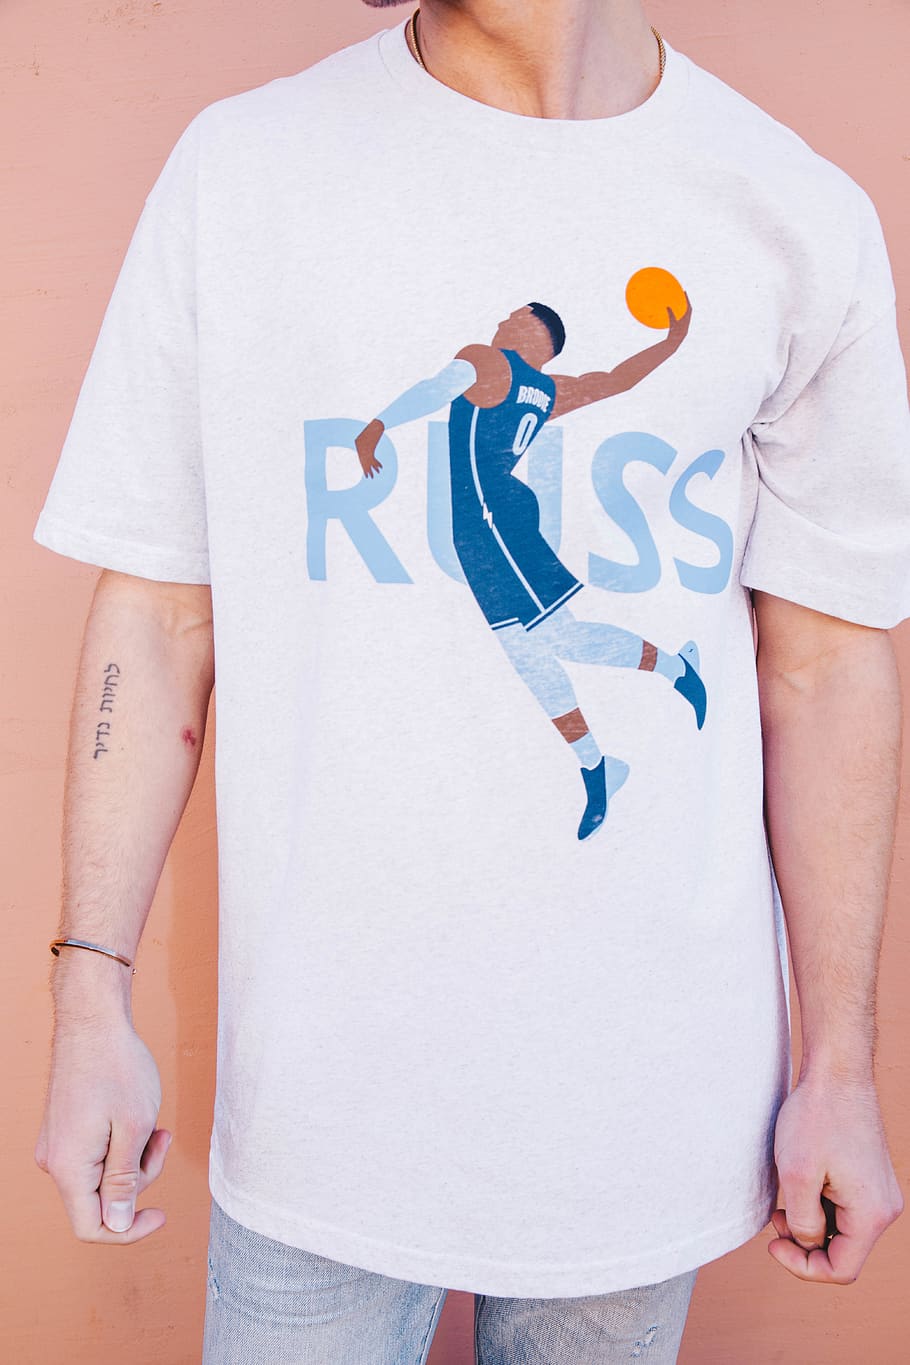 russell westbrook white shirt